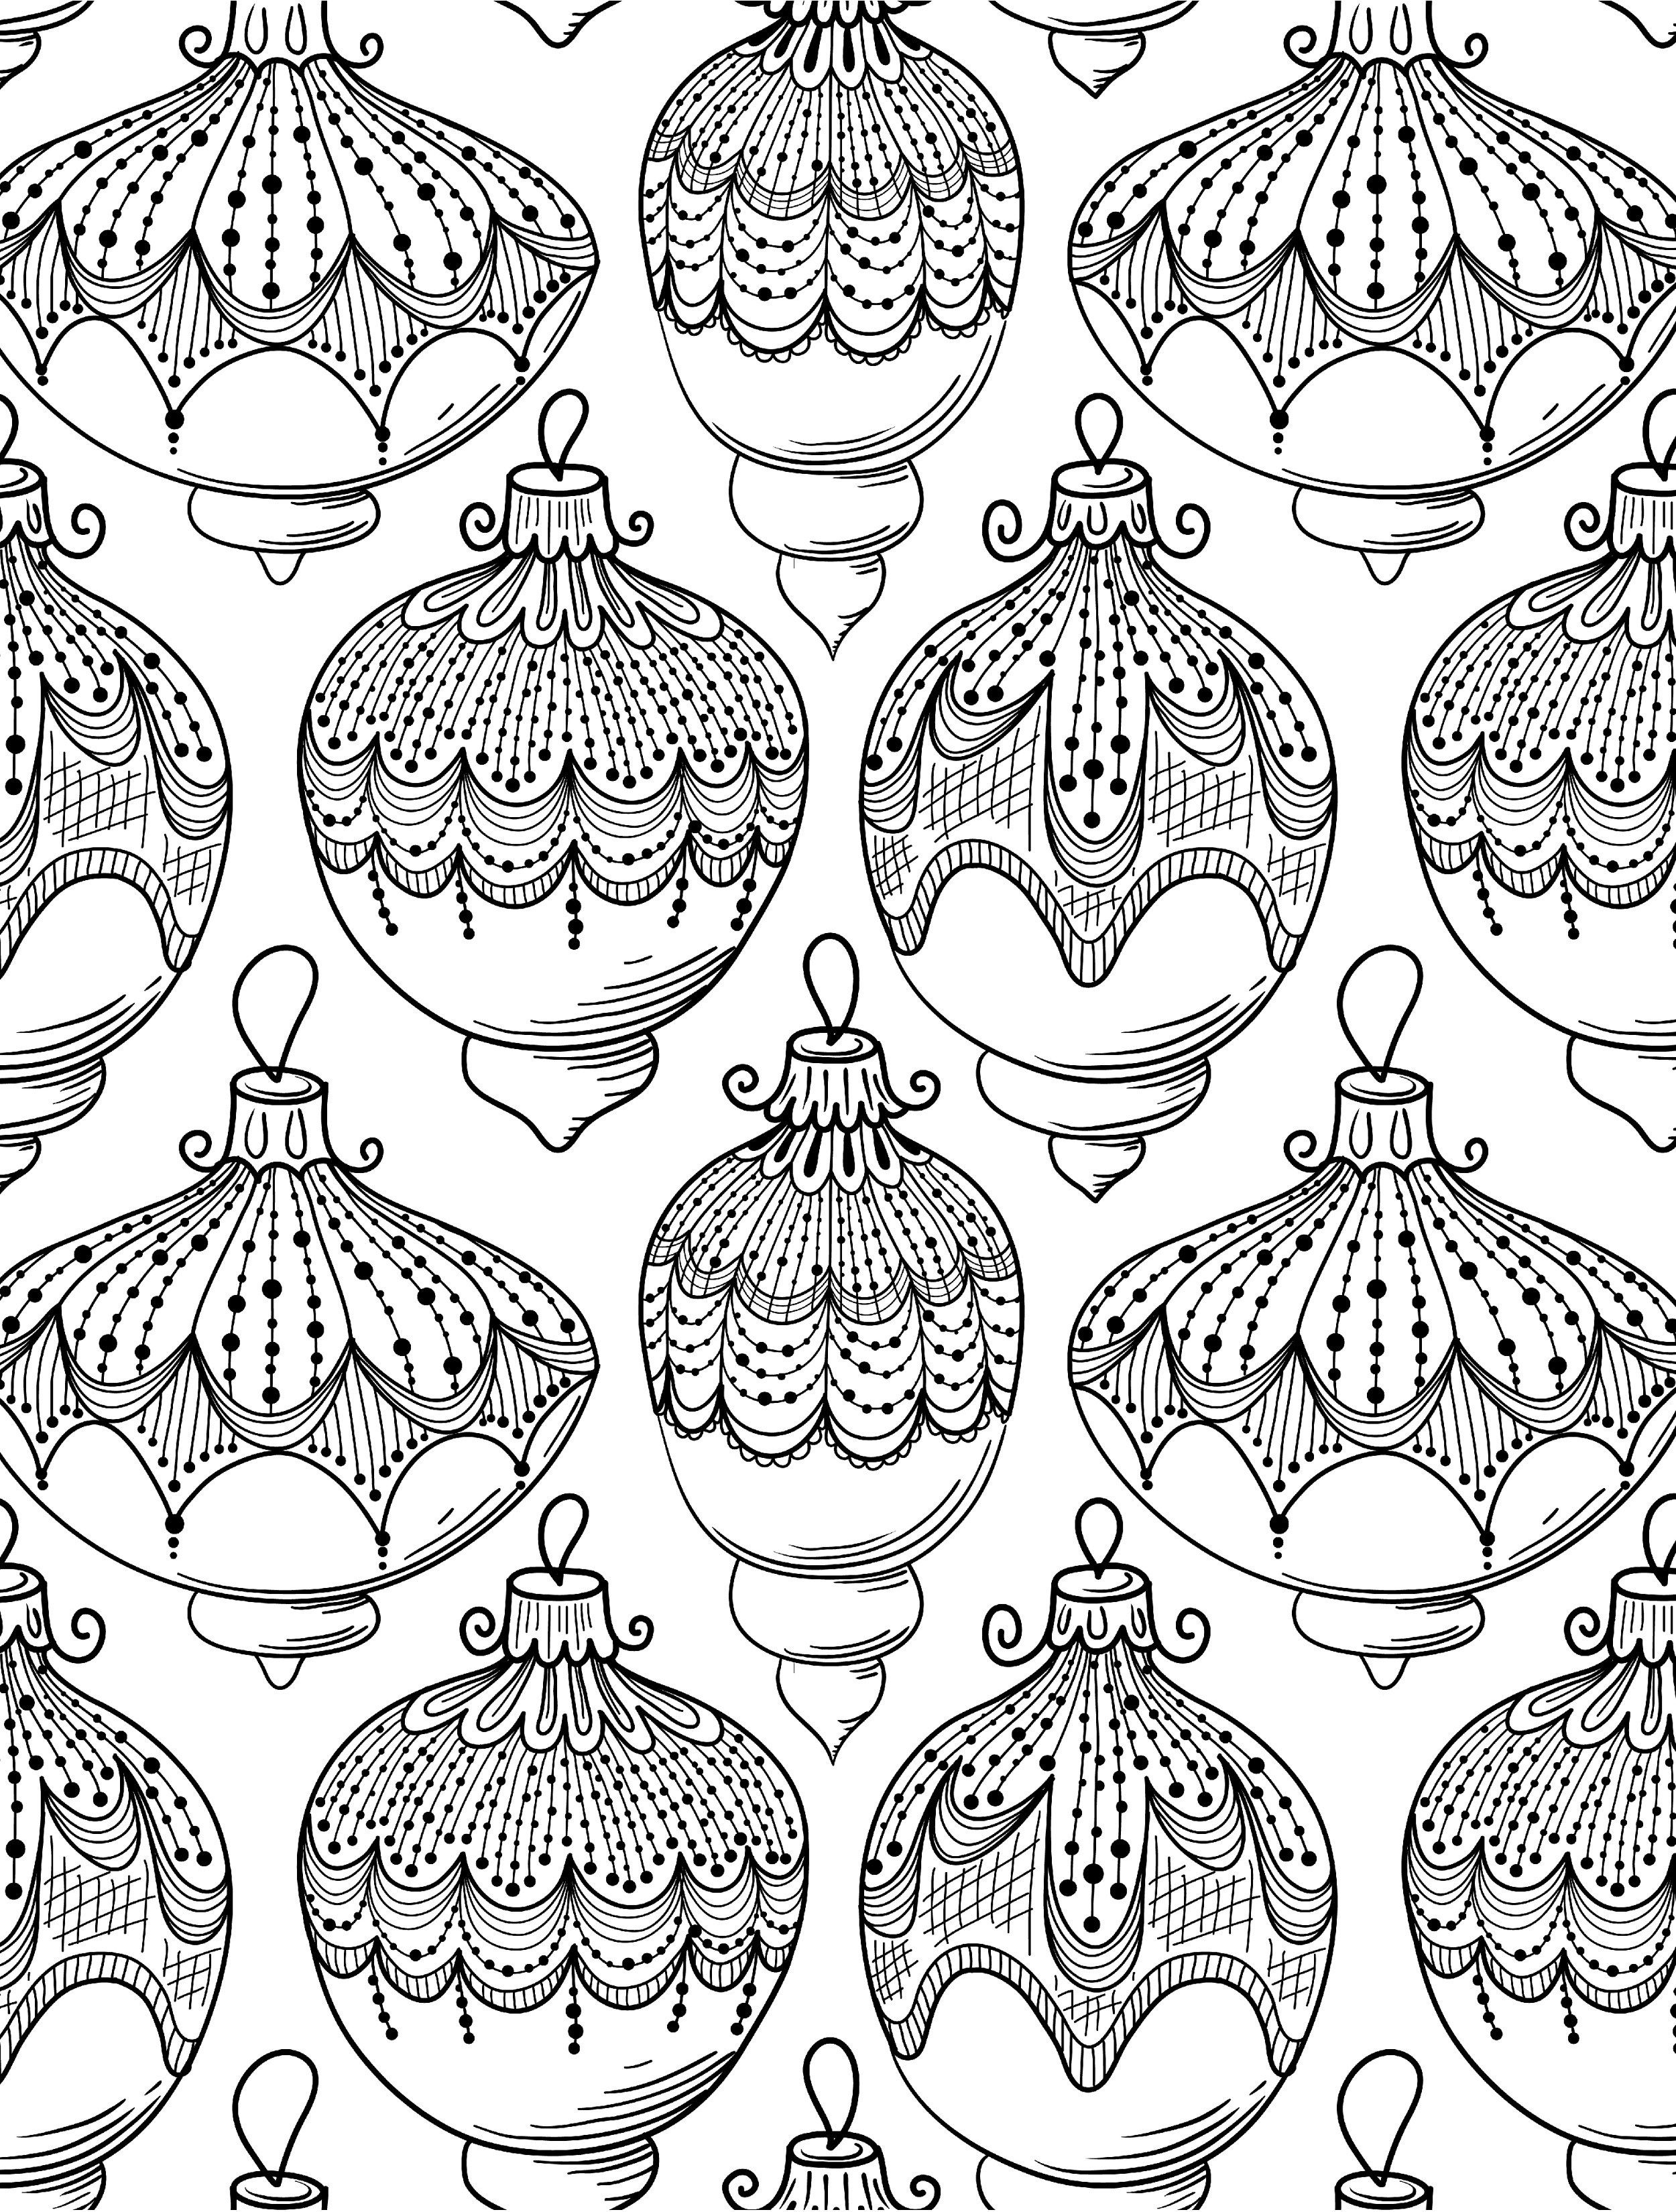 10 Free Printable Holiday Adult Coloring Pages | Adult And - Free Printable Holiday Coloring Pages